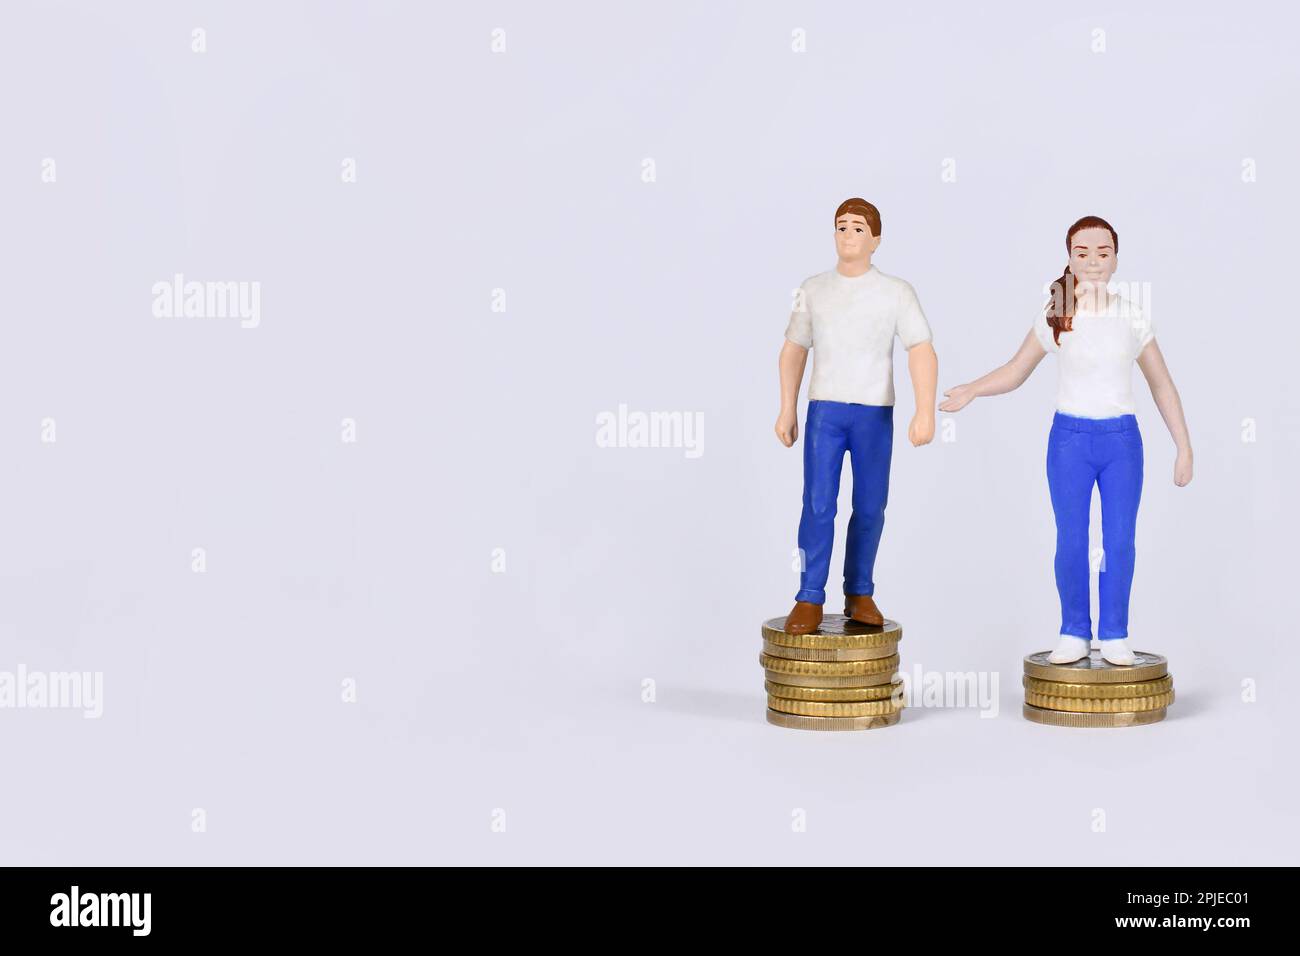 Gender pay gap concept with man and woman standing on different amount of coins with copy space Stock Photo